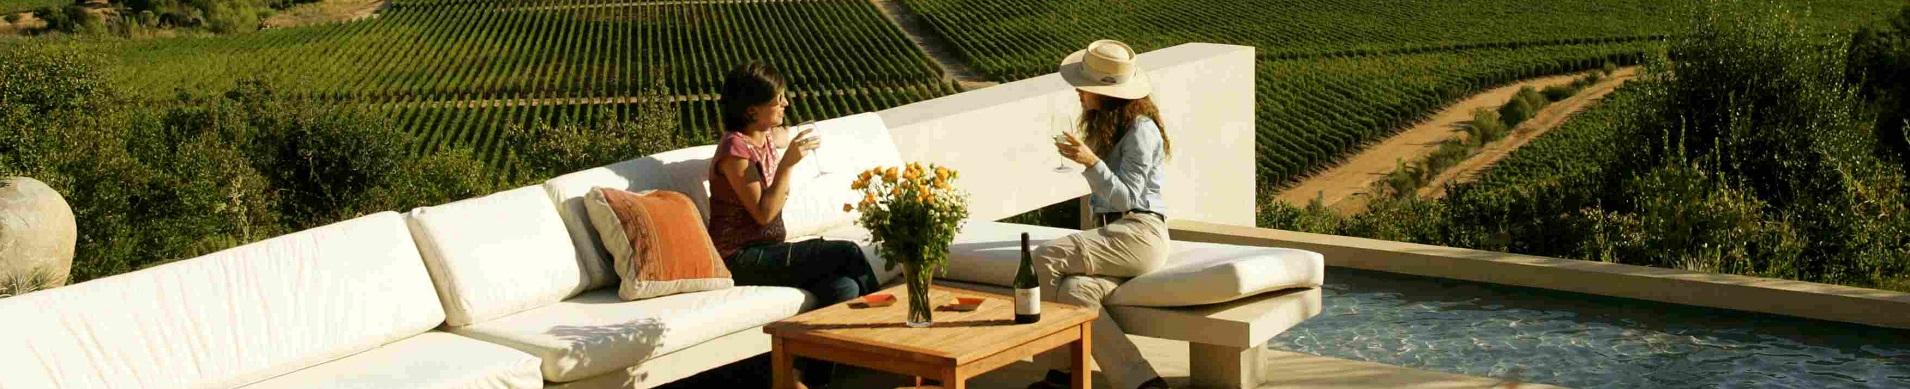 Villas in Sicily for wine enthusiasts